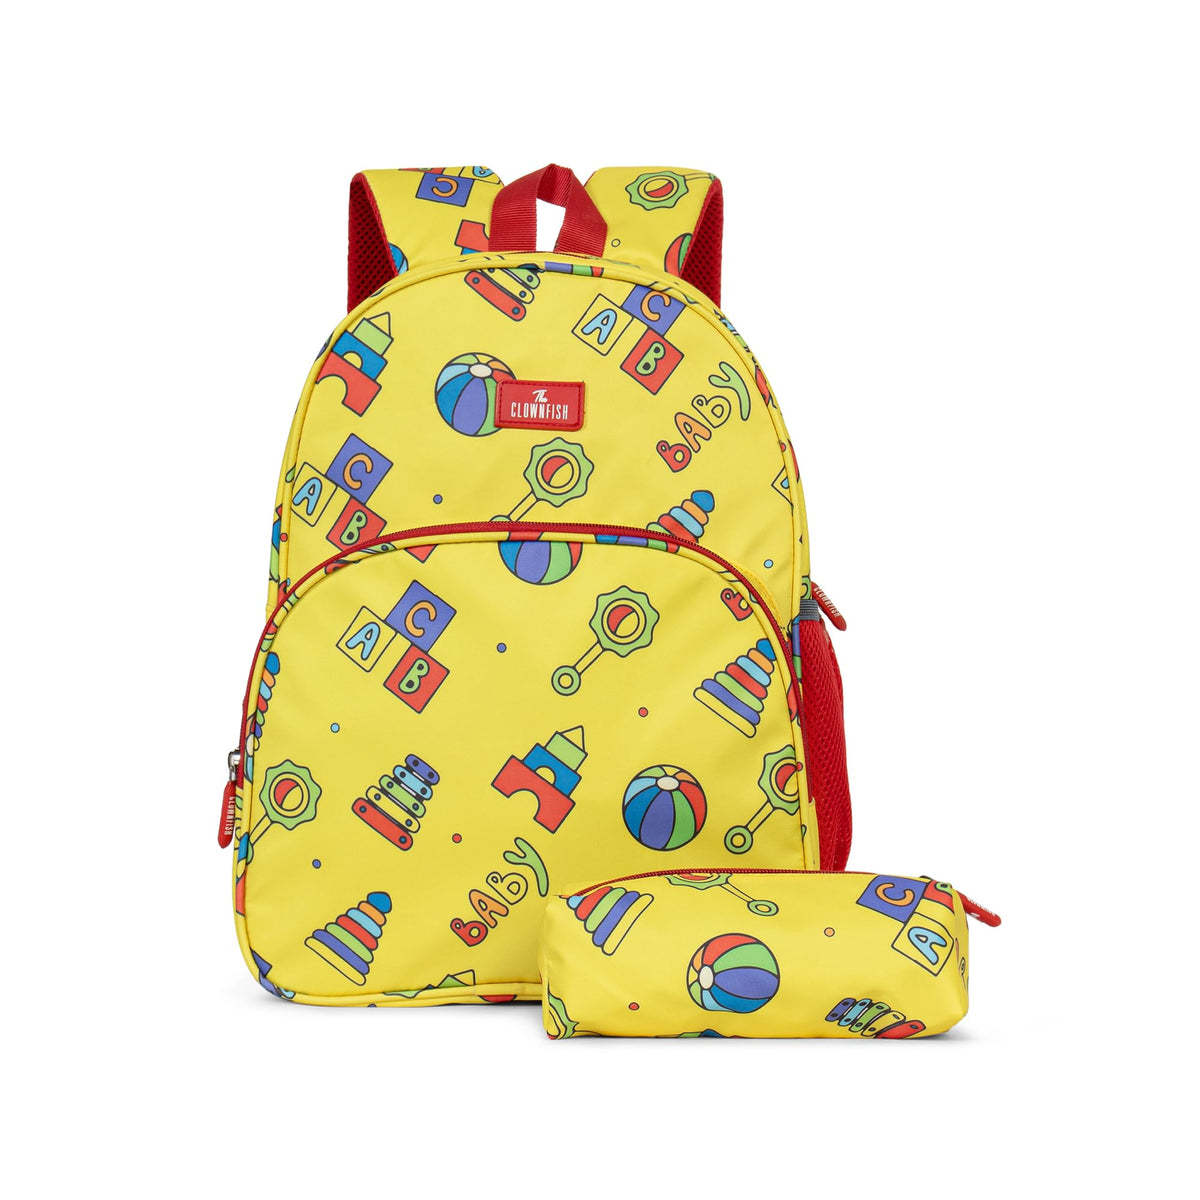 THE CLOWNFISH Cosmic Critters Series Printed Polyester 15 Litres Kids Backpack School Bag with Free Pencil Staionery Pouch Daypack Picnic Bag for Tiny Tots Of Age 5-7 Years (Yellow - Block)